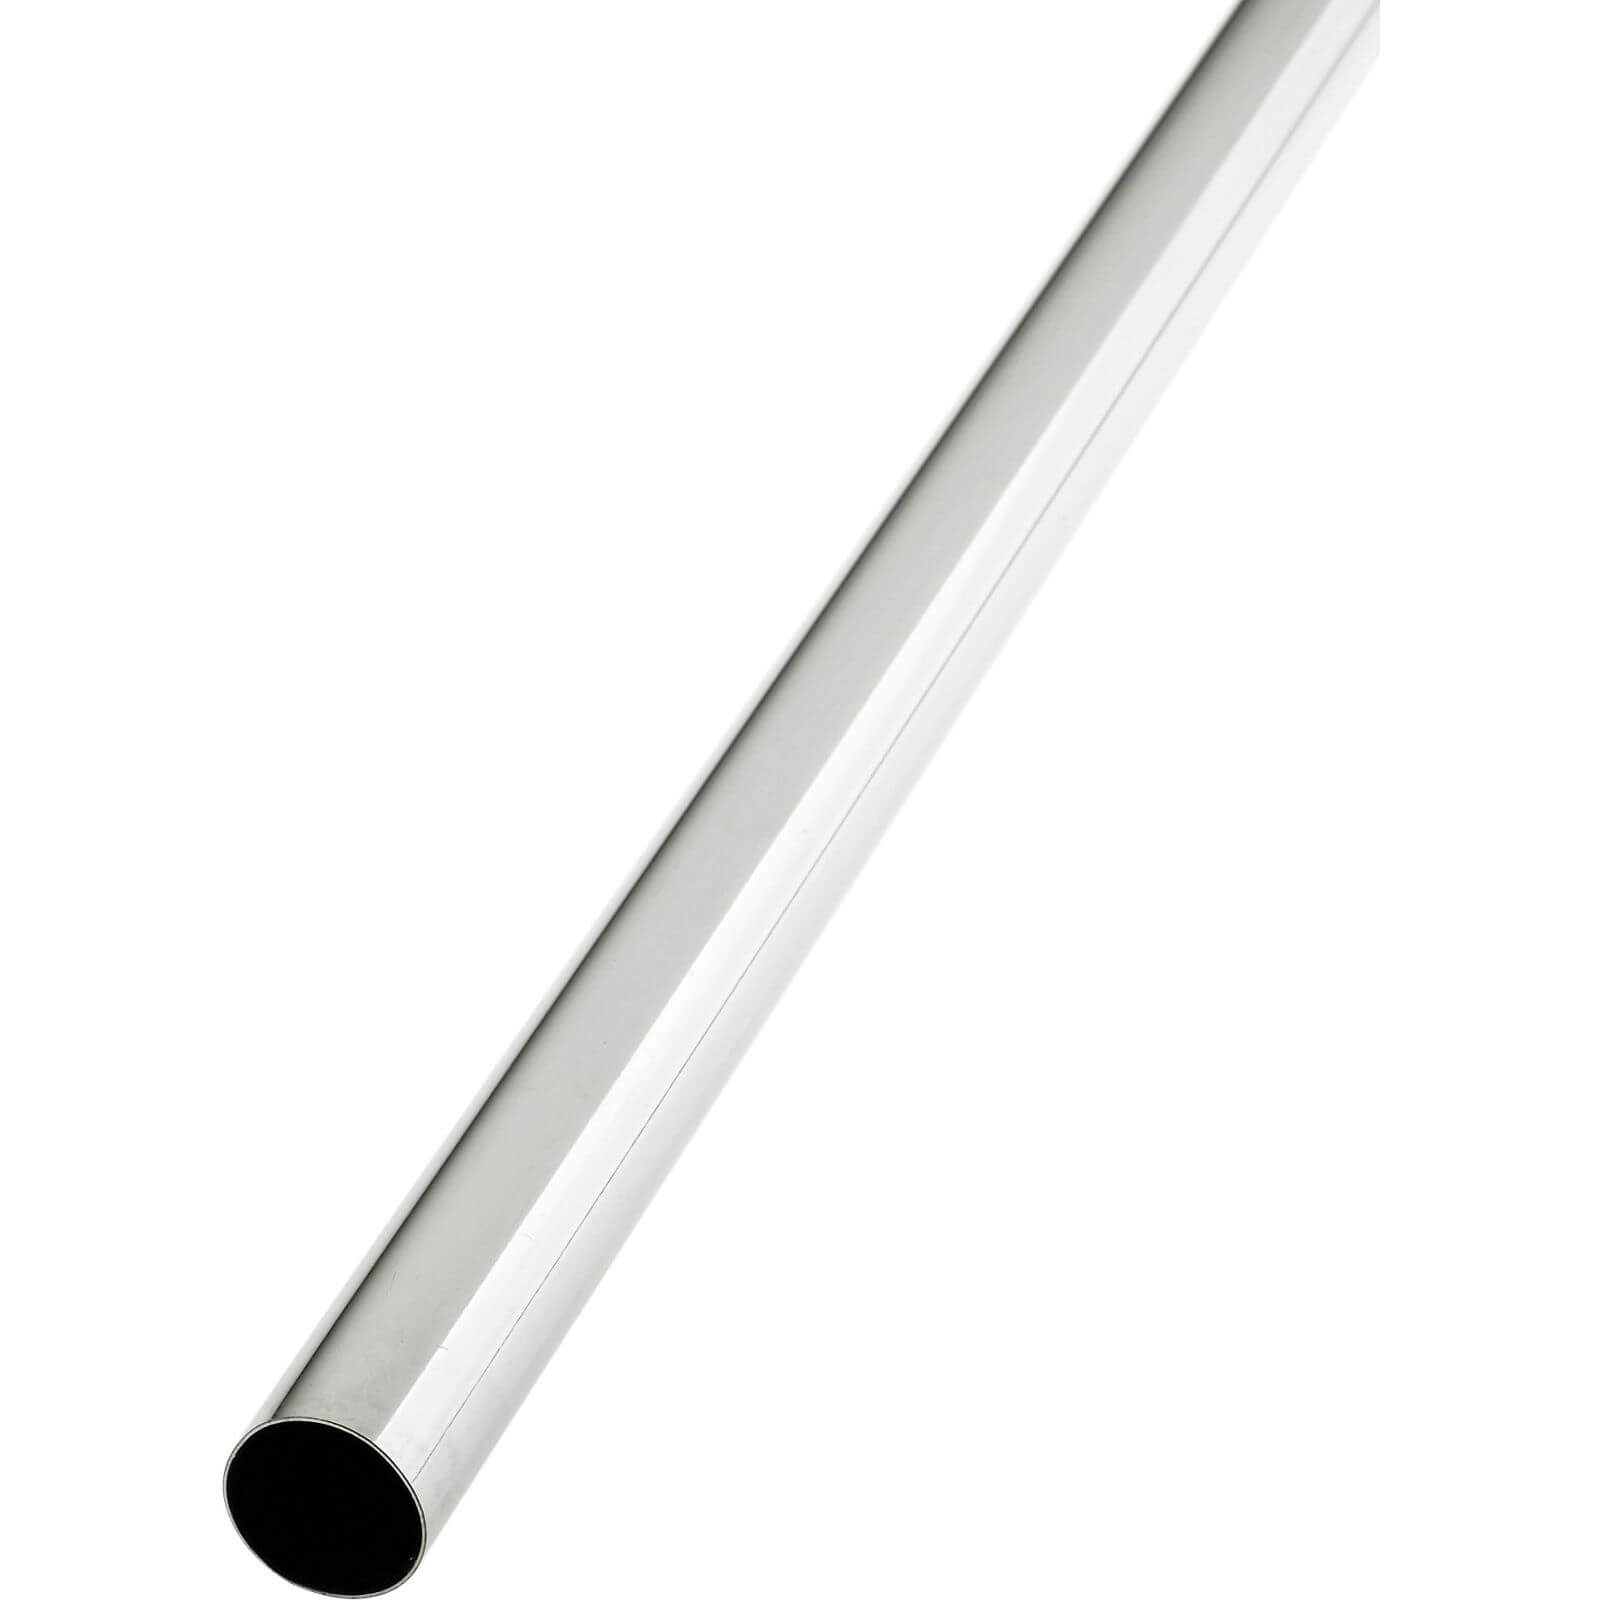 Photo of Rothley Steel Tube - Chrome Plated - 25mm X 1.2m